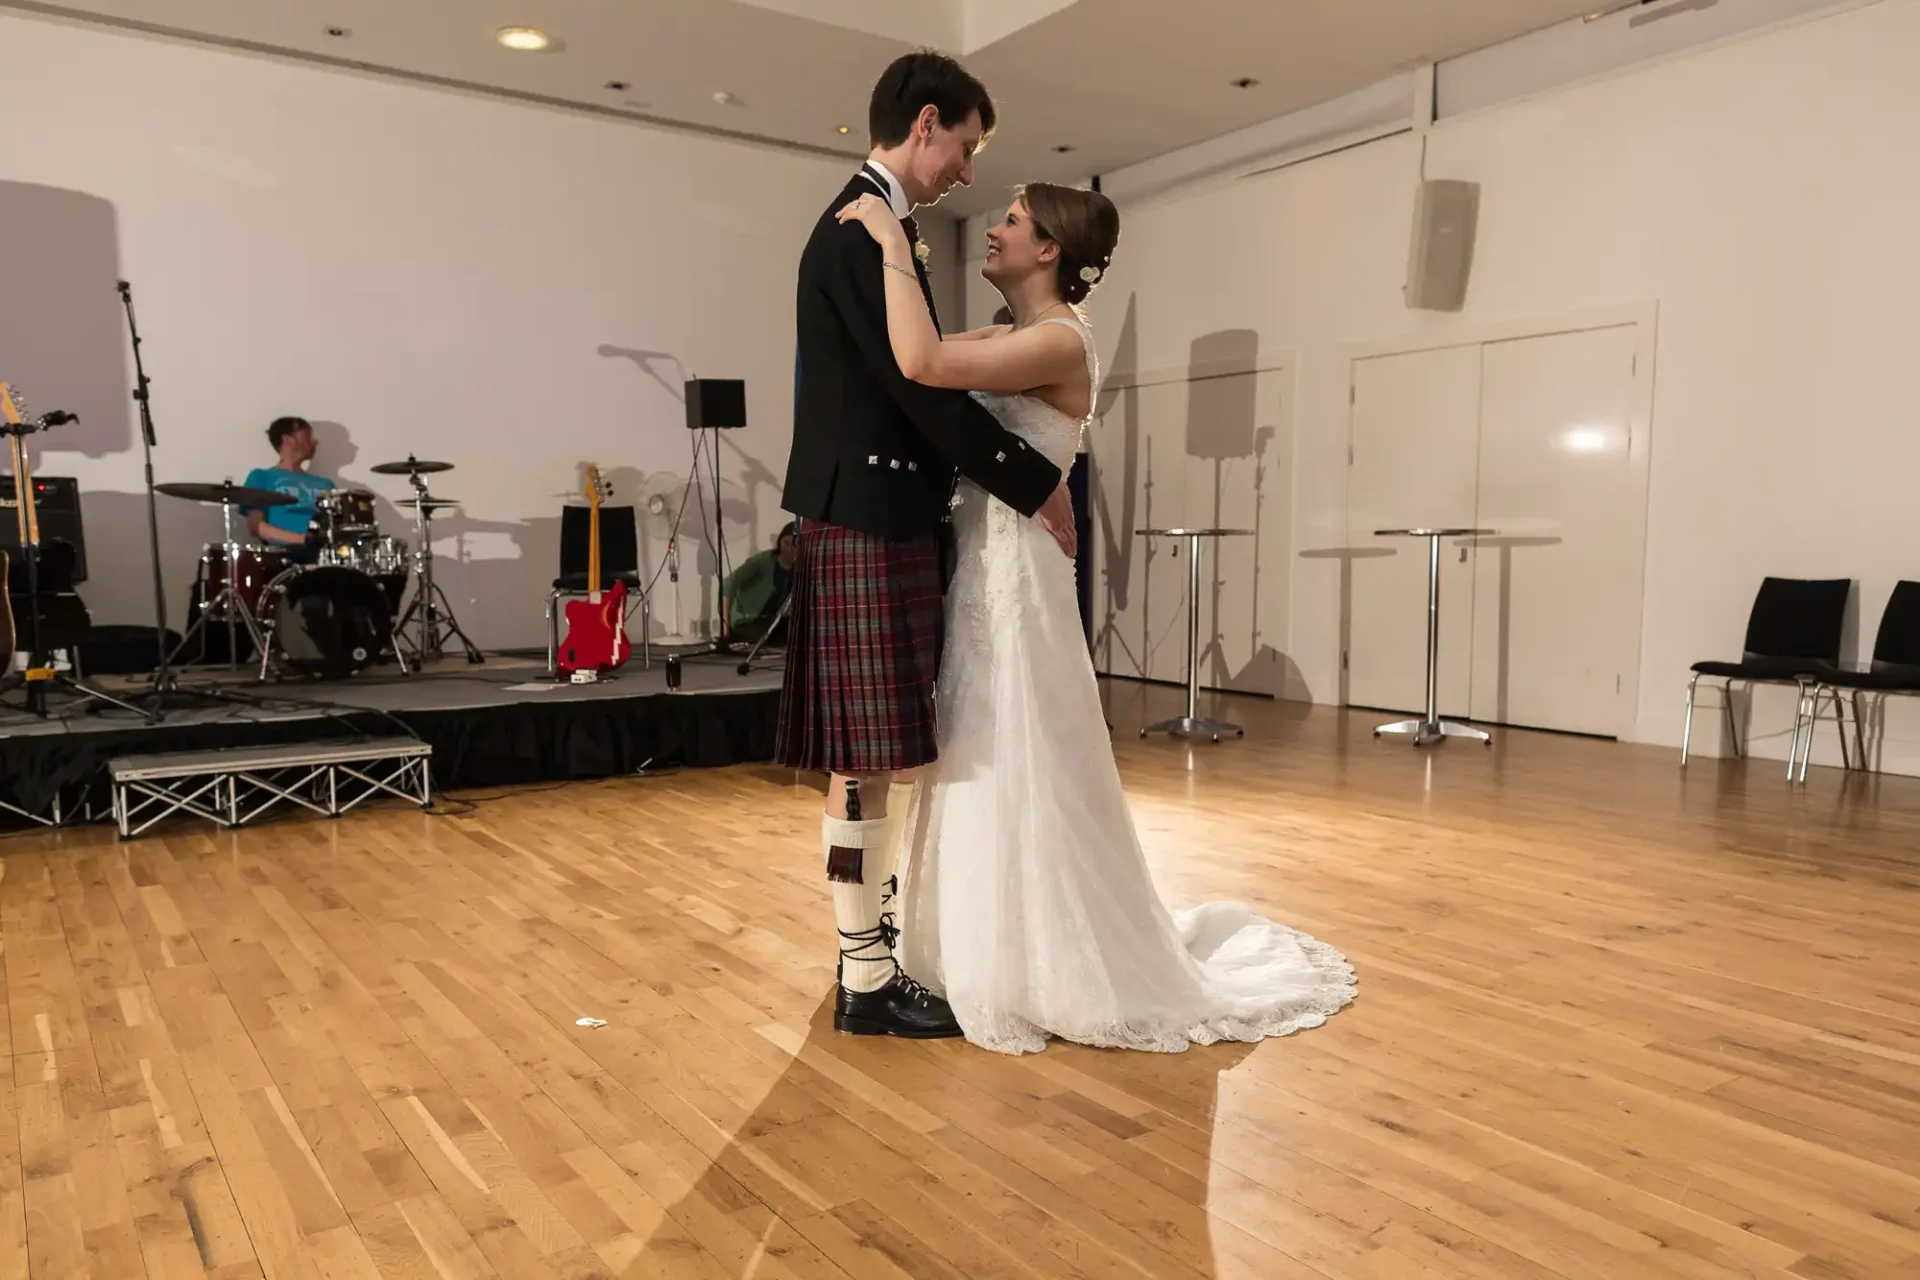 A bride in a white dress and a groom in a kilt share a romantic dance at their wedding reception, with a band playing in the background.